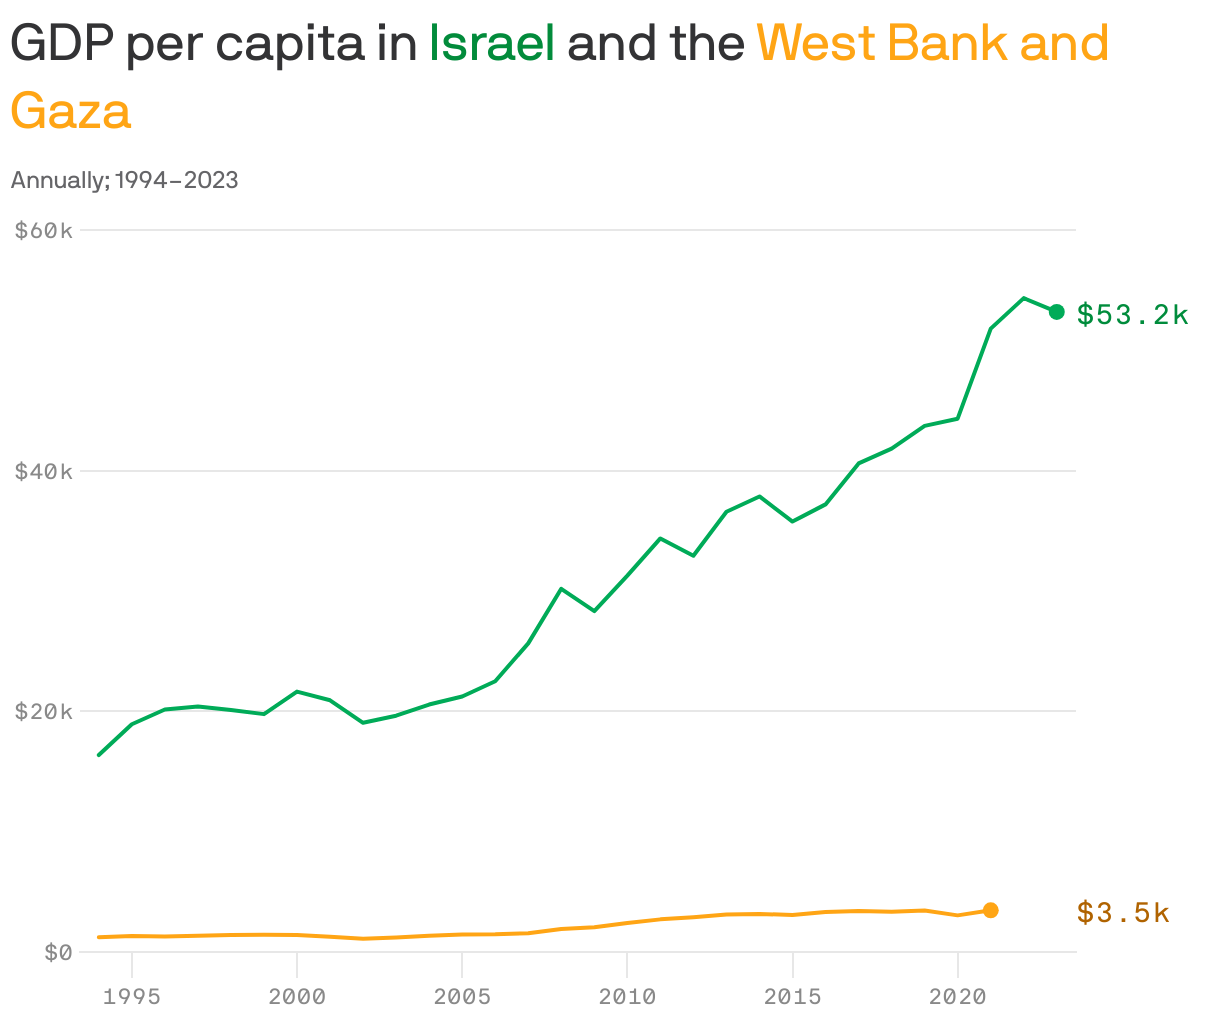 GDP per capita in <span style="color:#028B3B;">Israel</span> and the <span style="color:#FFA515;">West Bank and Gaza</span>